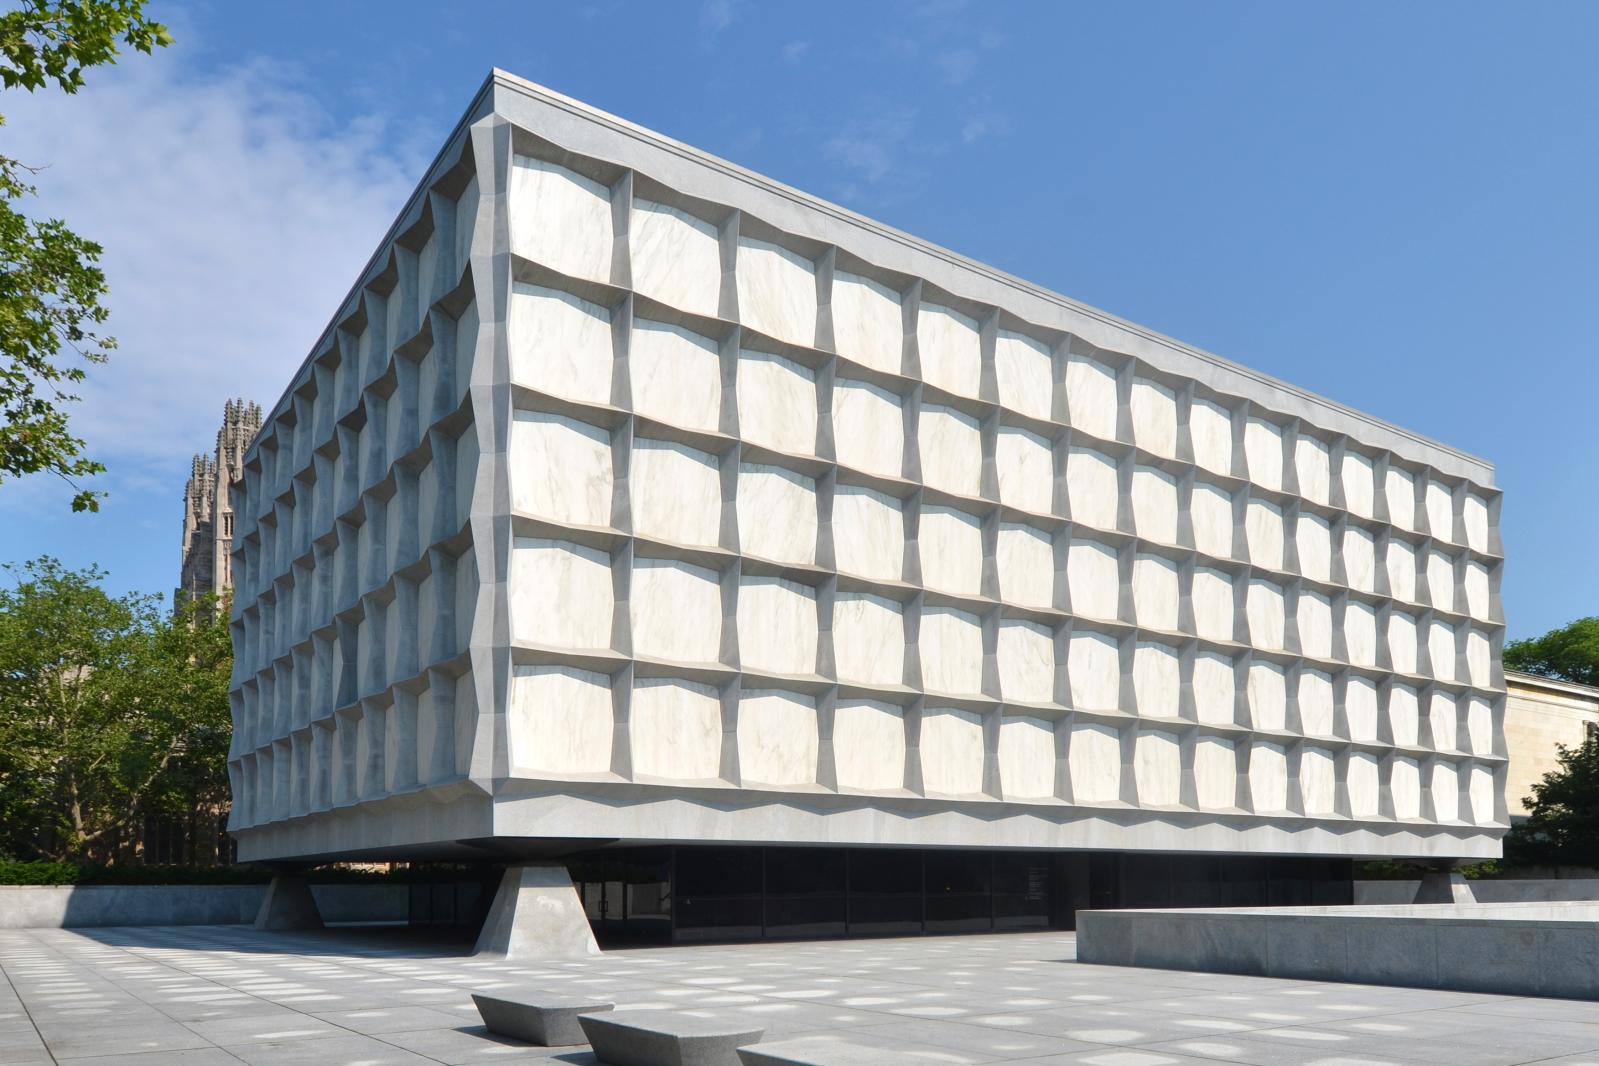 The Beinecke Rare Book and Manuscript Library, Yale’s Treasure Chest